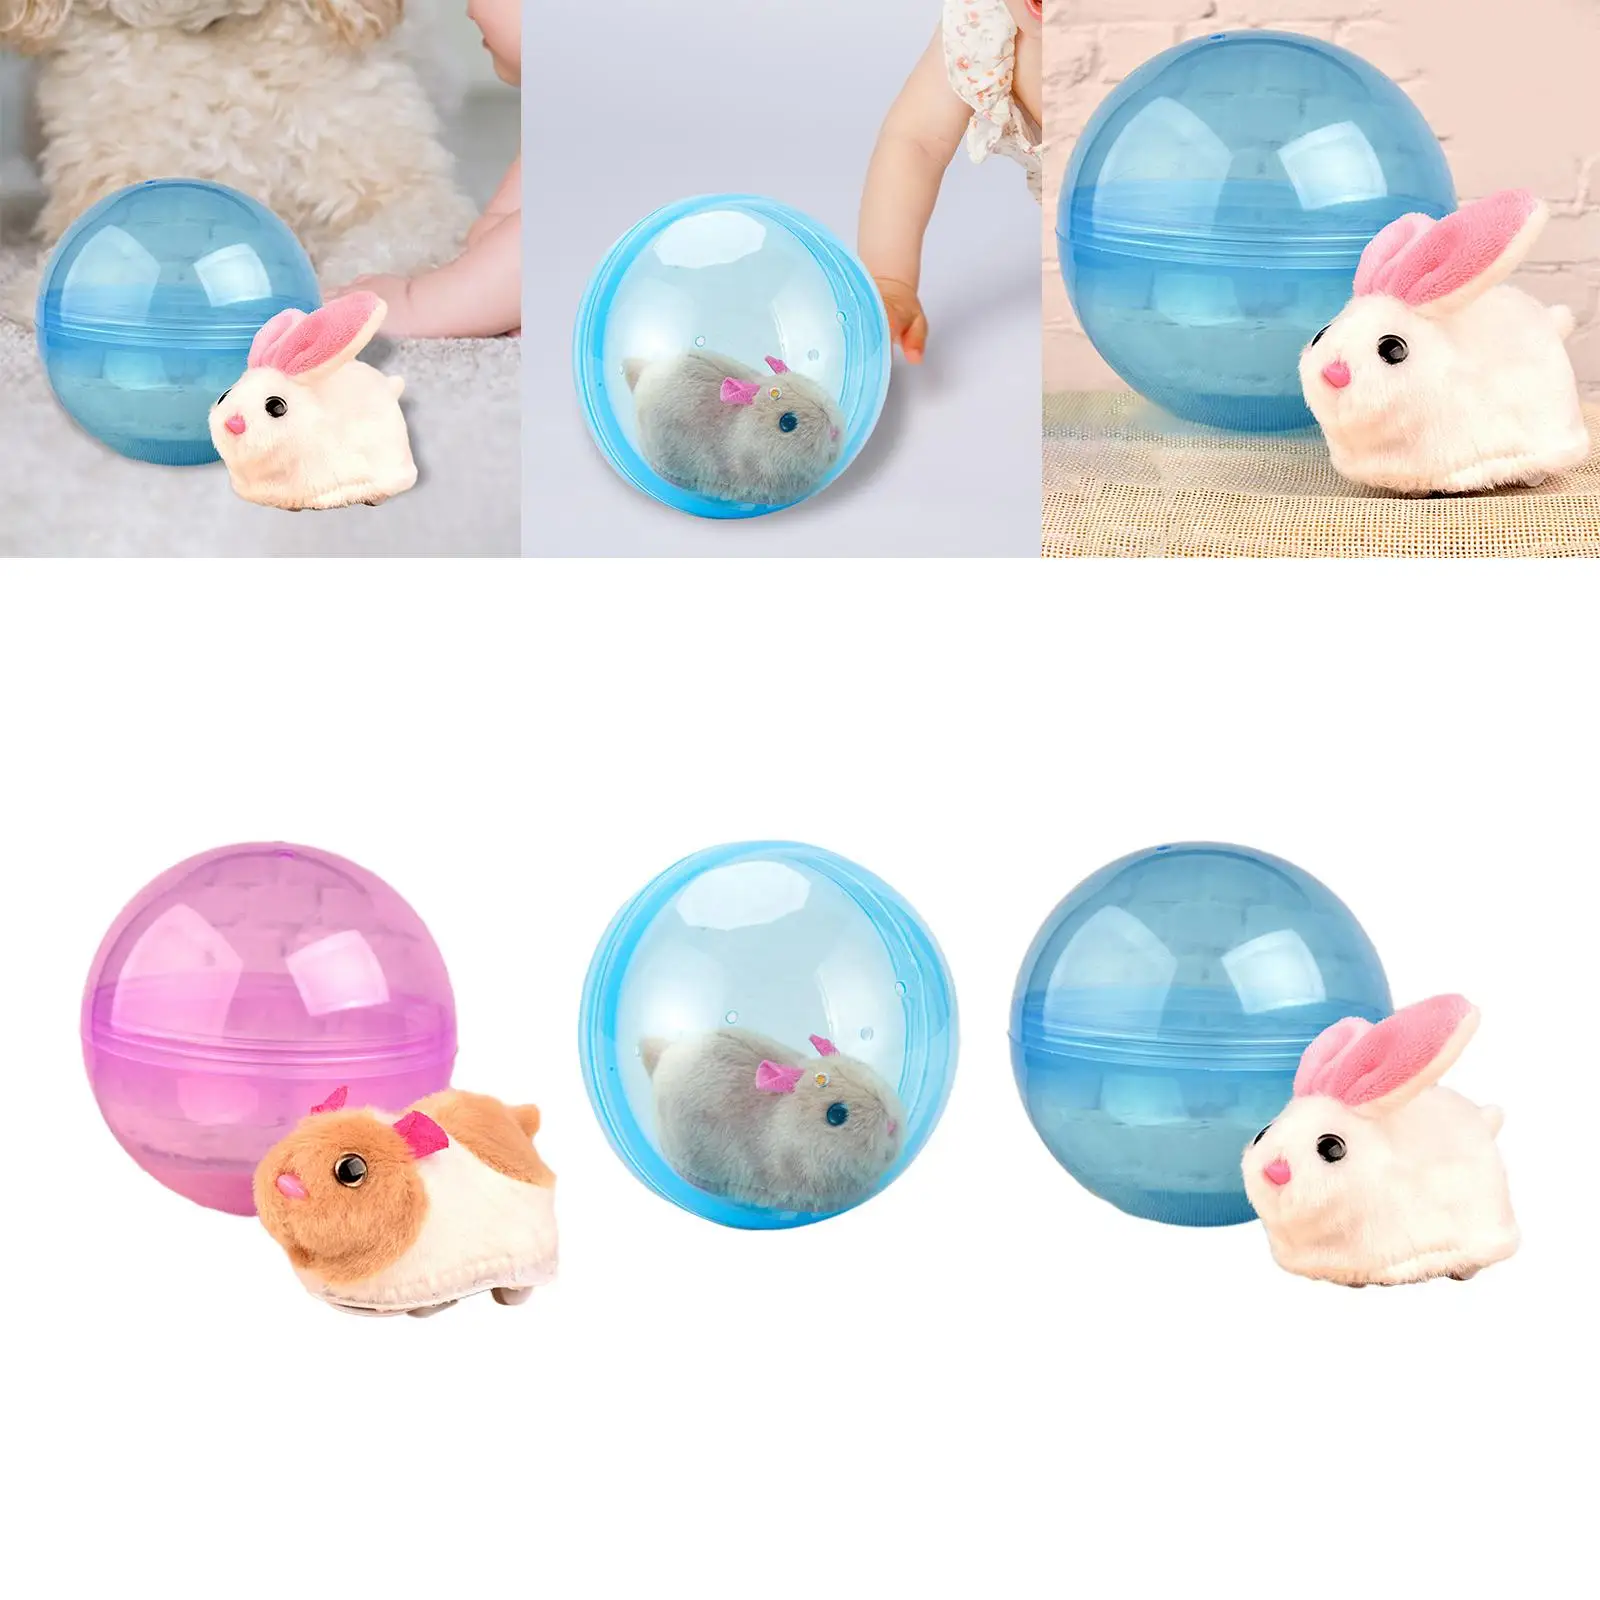 Ball Toys Interactive Plush Animals Toys for Children Toddlers Holiday Gifts